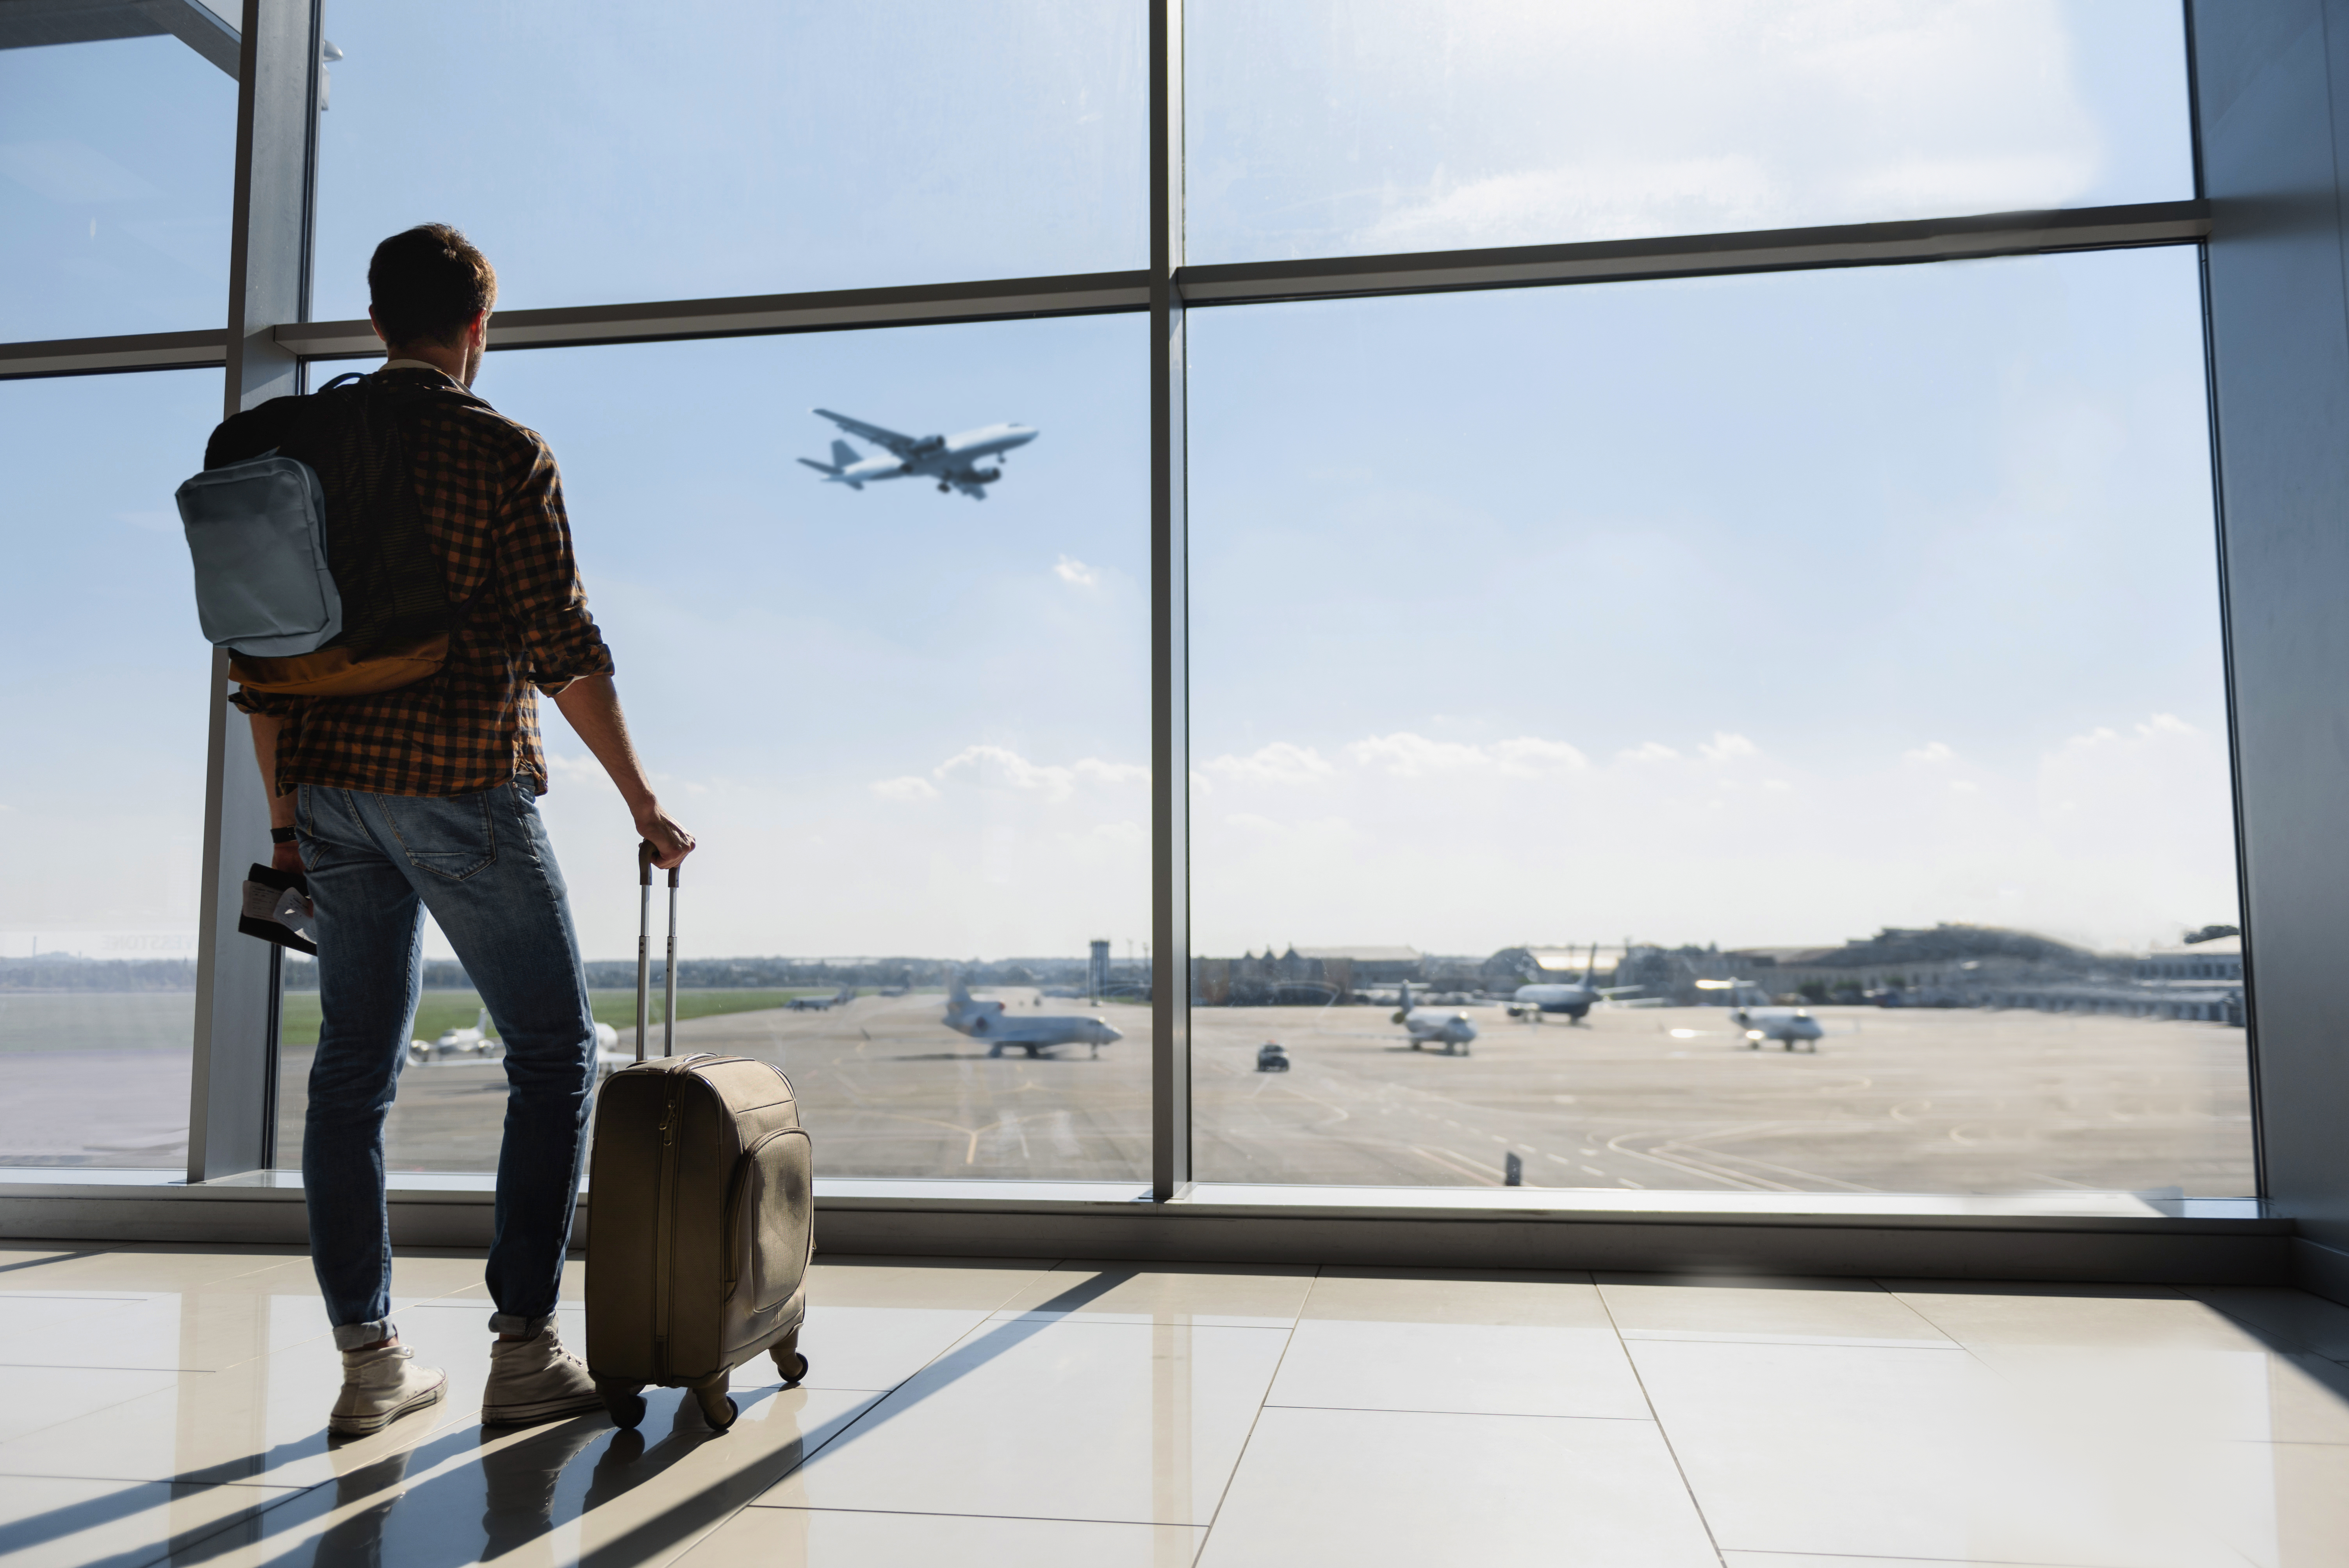 A young man with luggage stands near the window at the airport and watches an airplane before departure | Source: Shutterstock